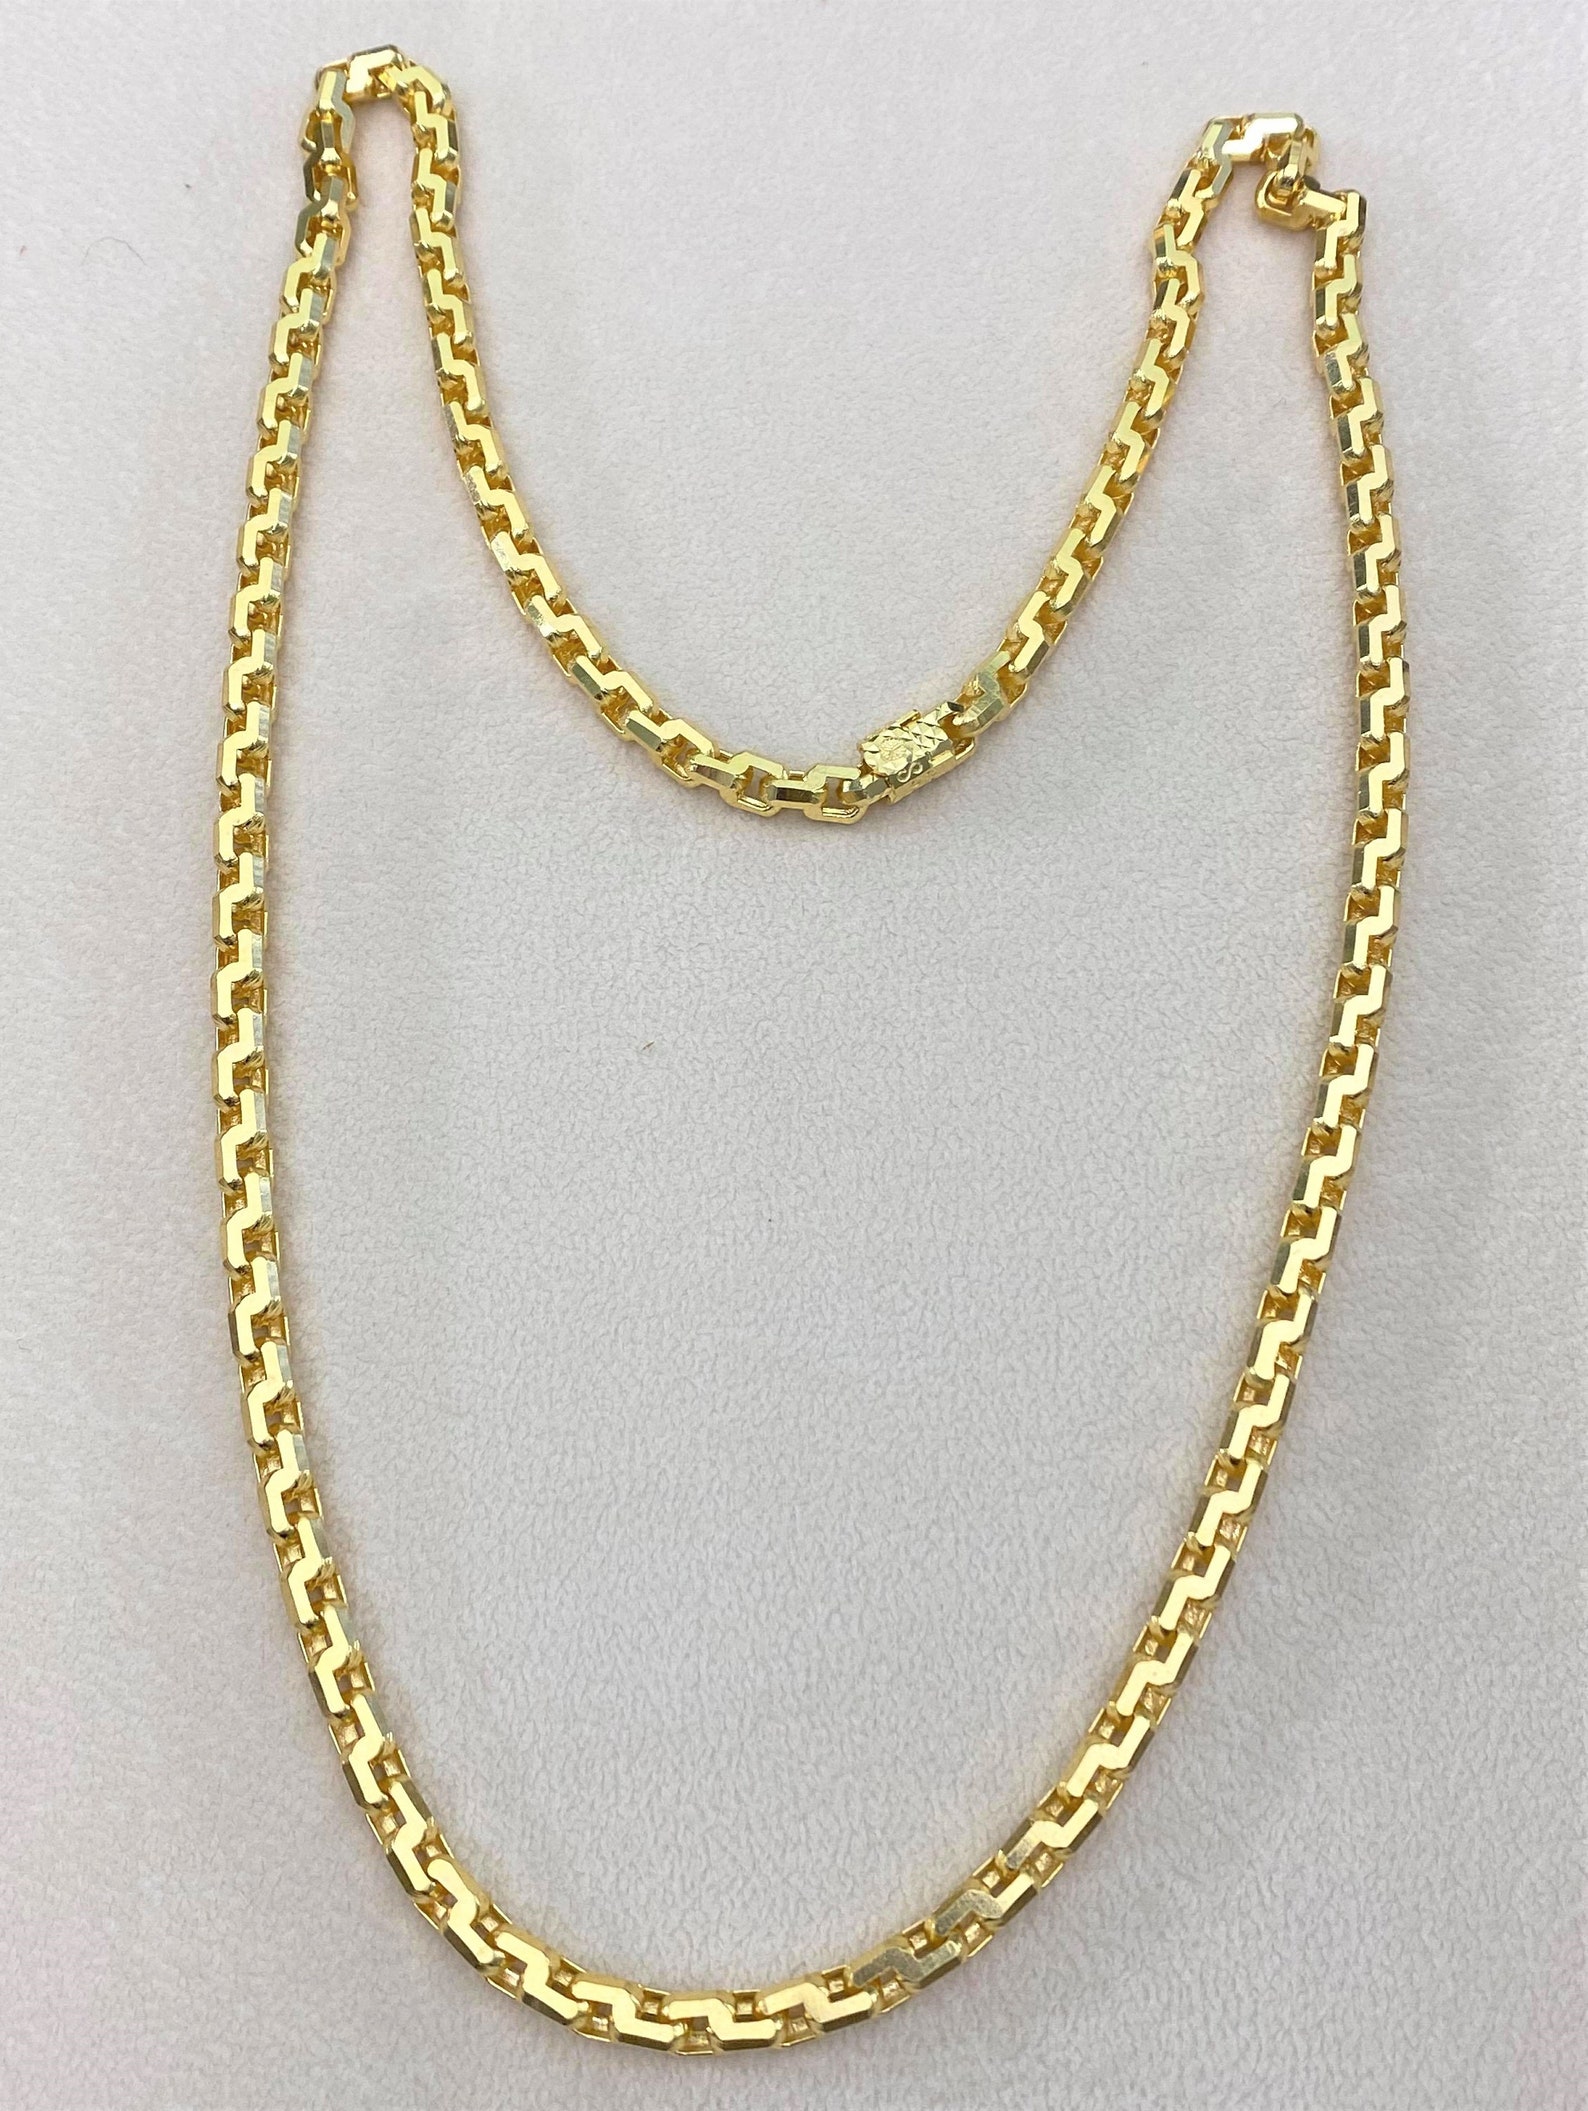 Vintage 14K Solid Gold Anchor Chain Link Necklace 24'' | Etsy